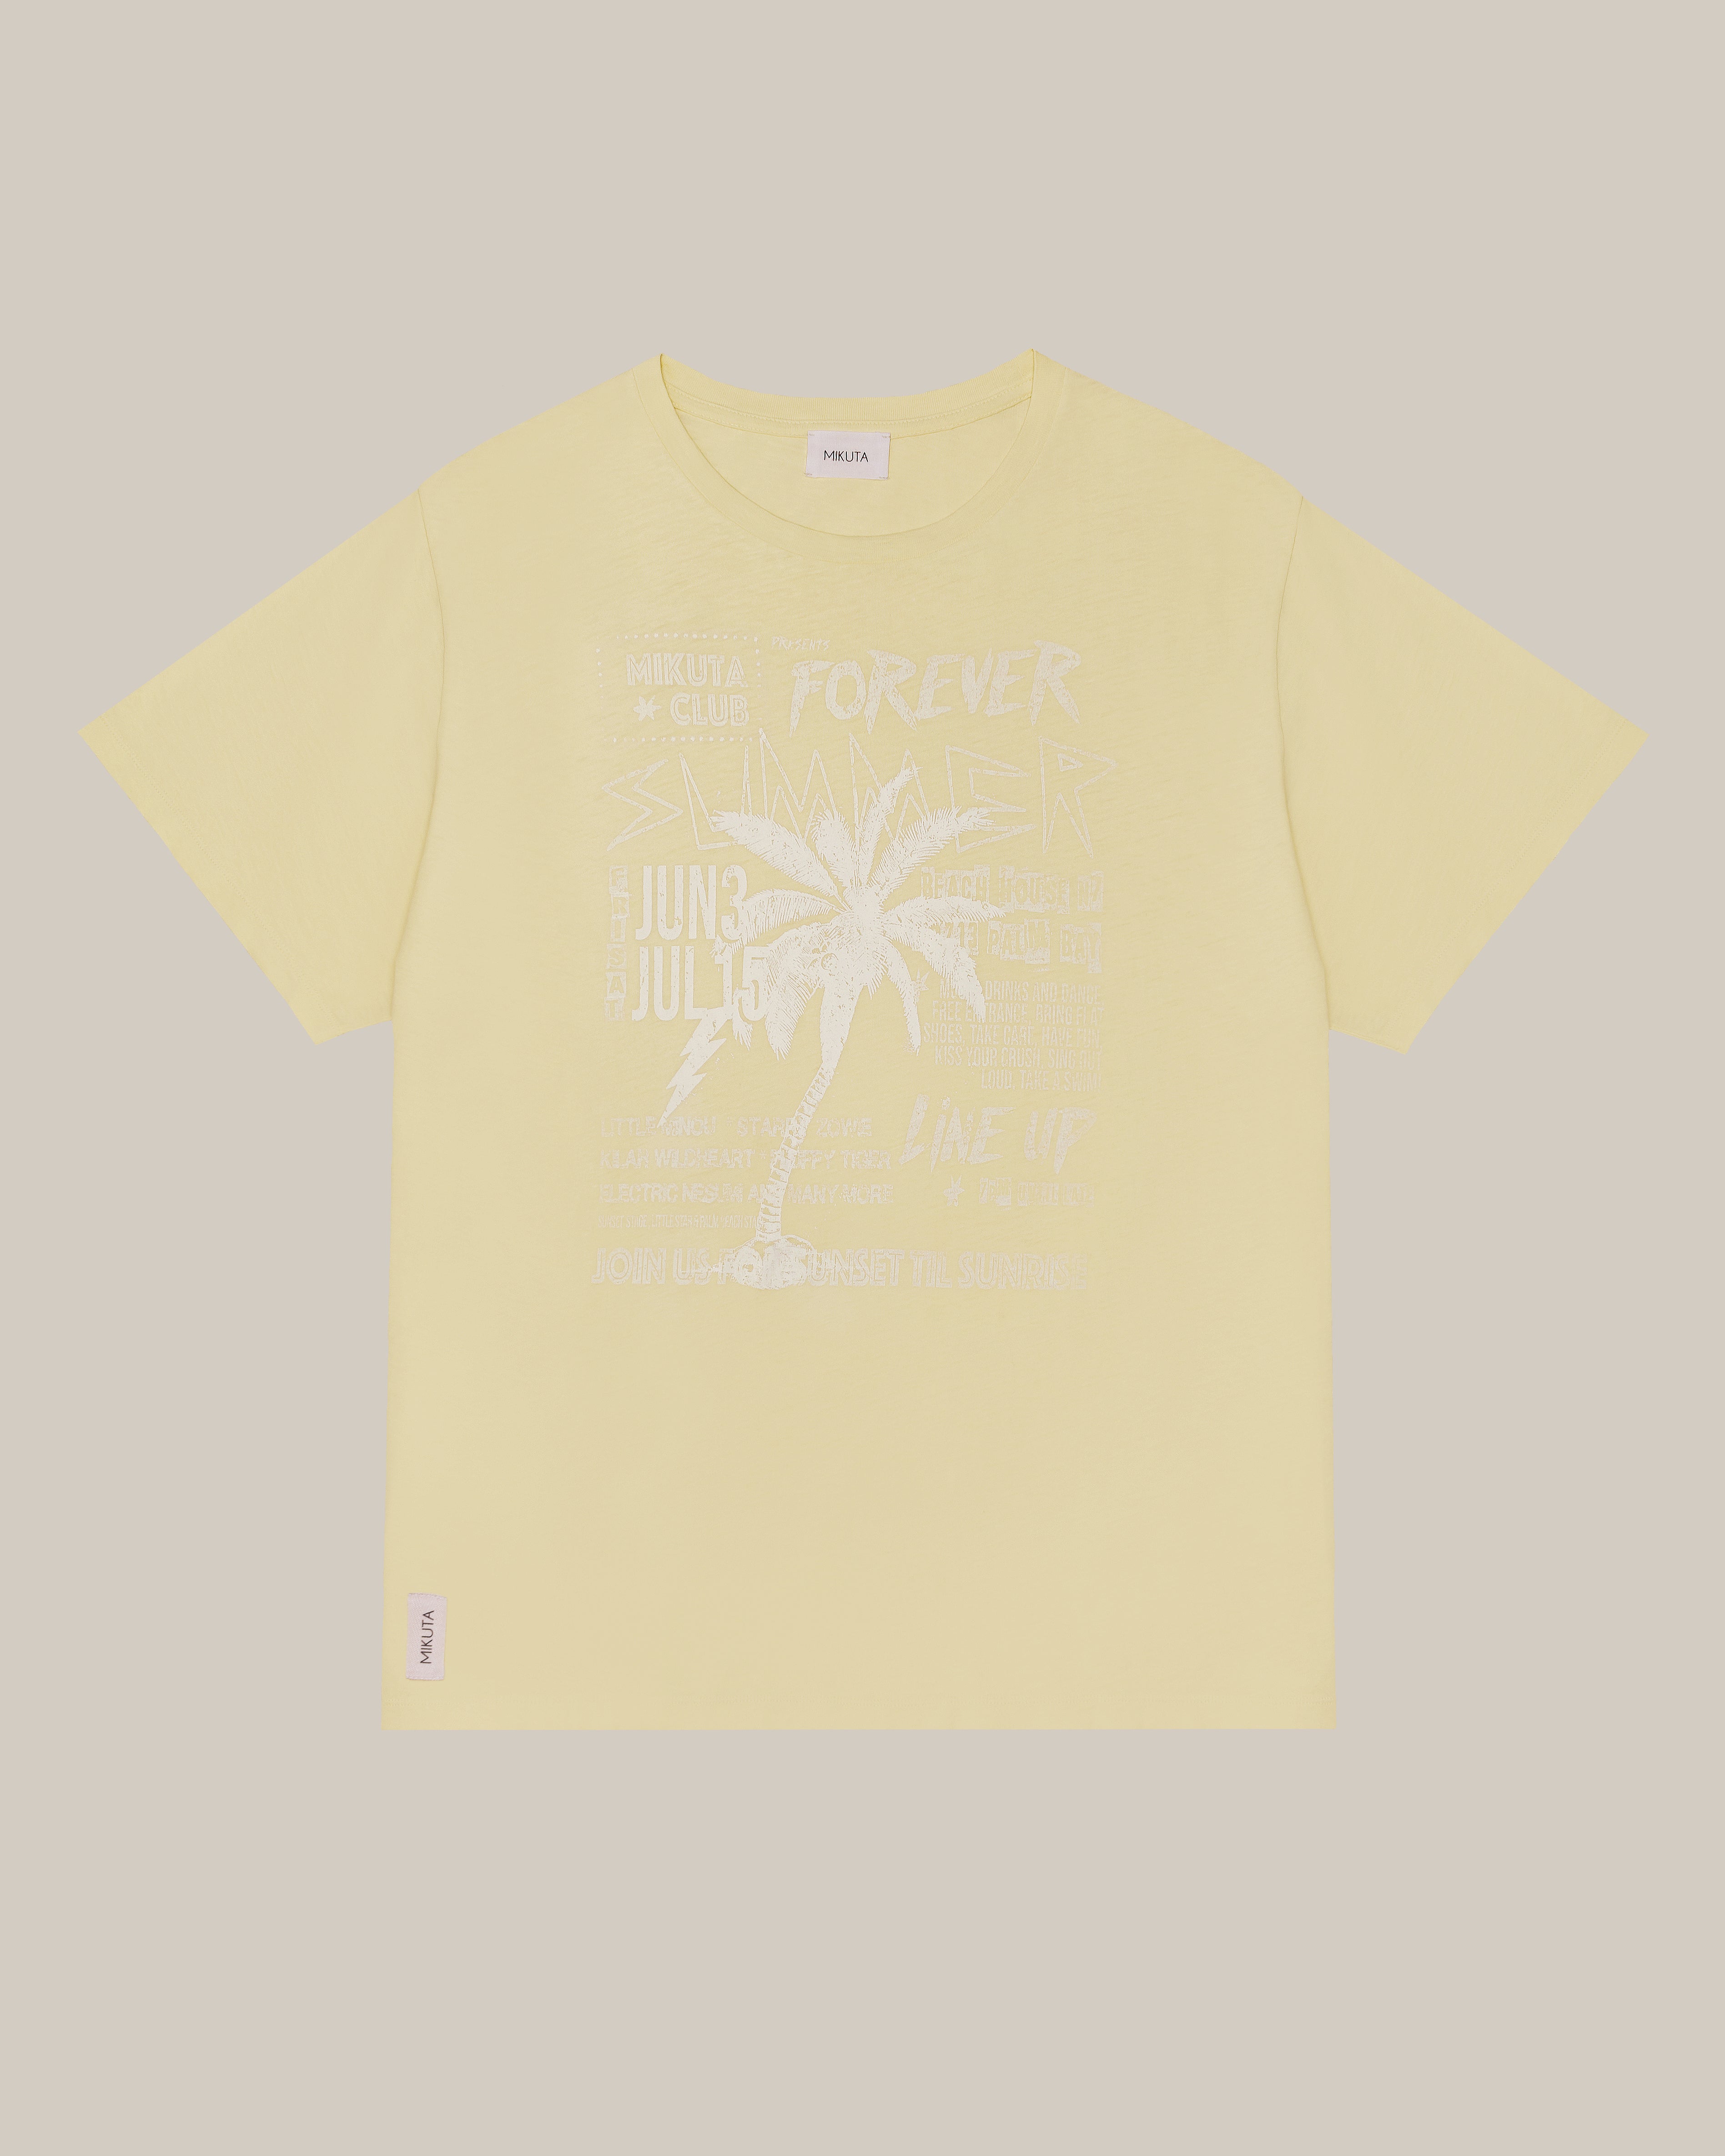 The Yellow Relaxed T-Shirt